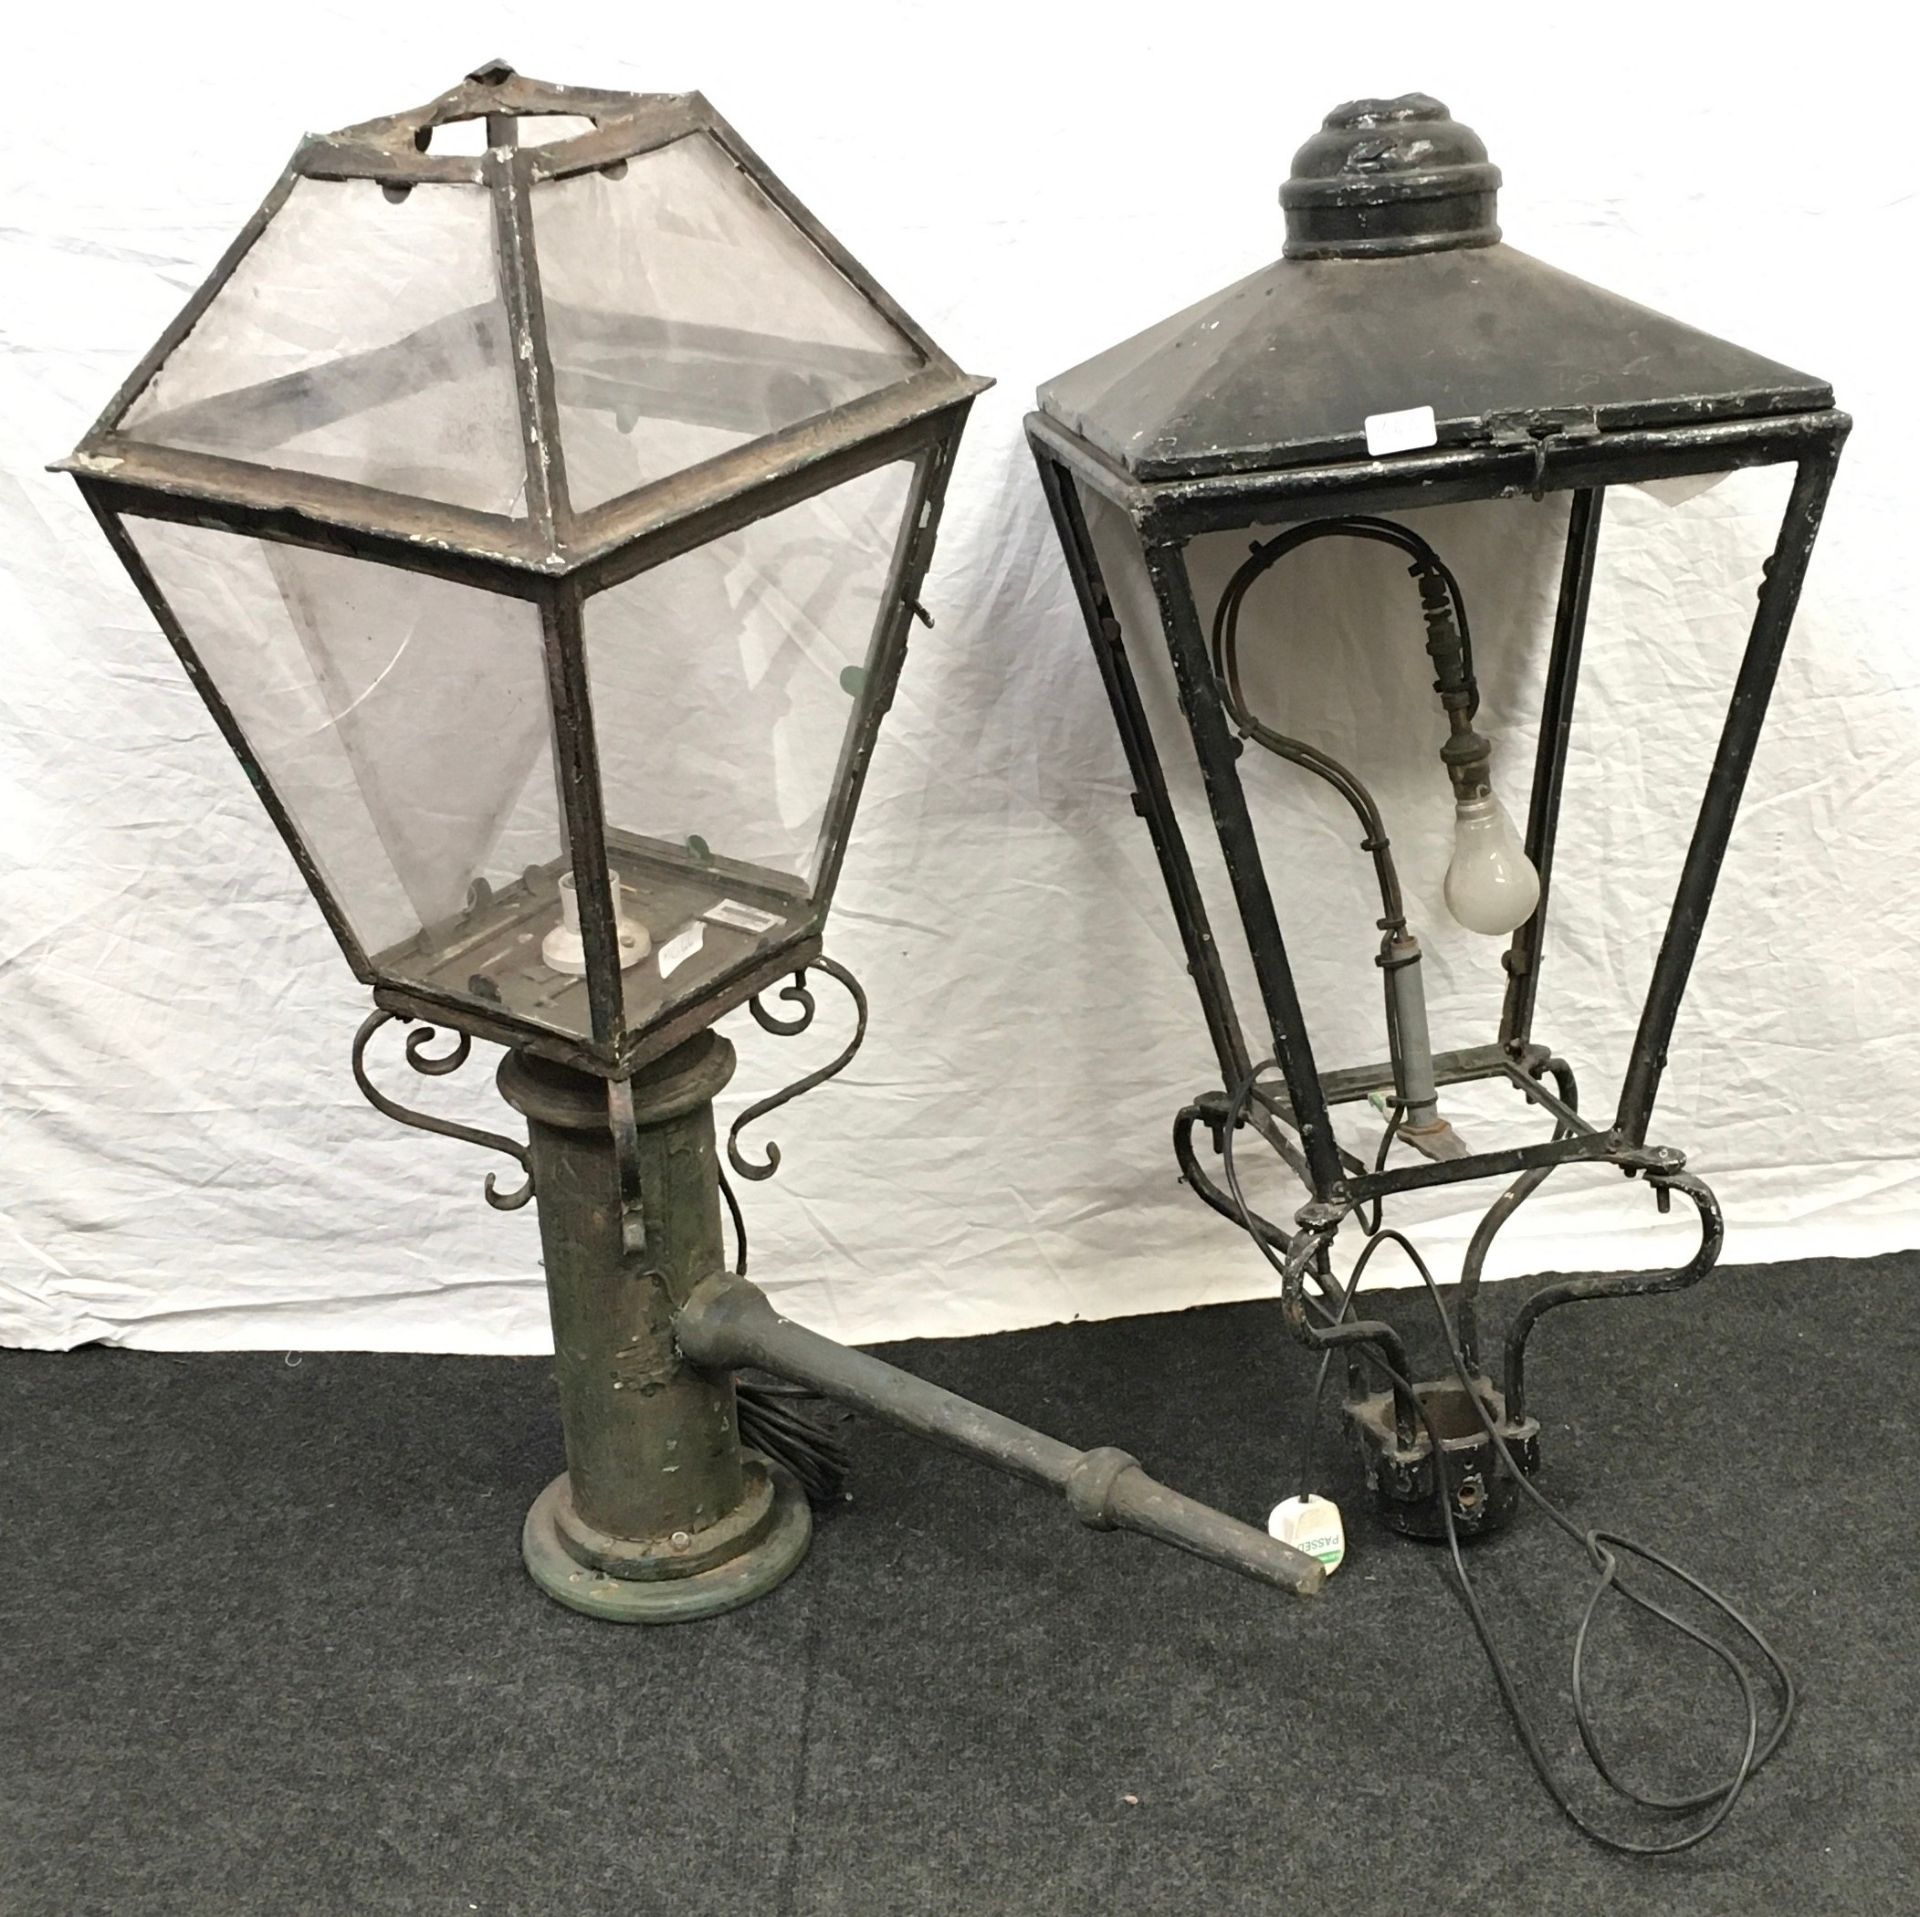 Two Vintage Lantern/street lamps converted to electricity